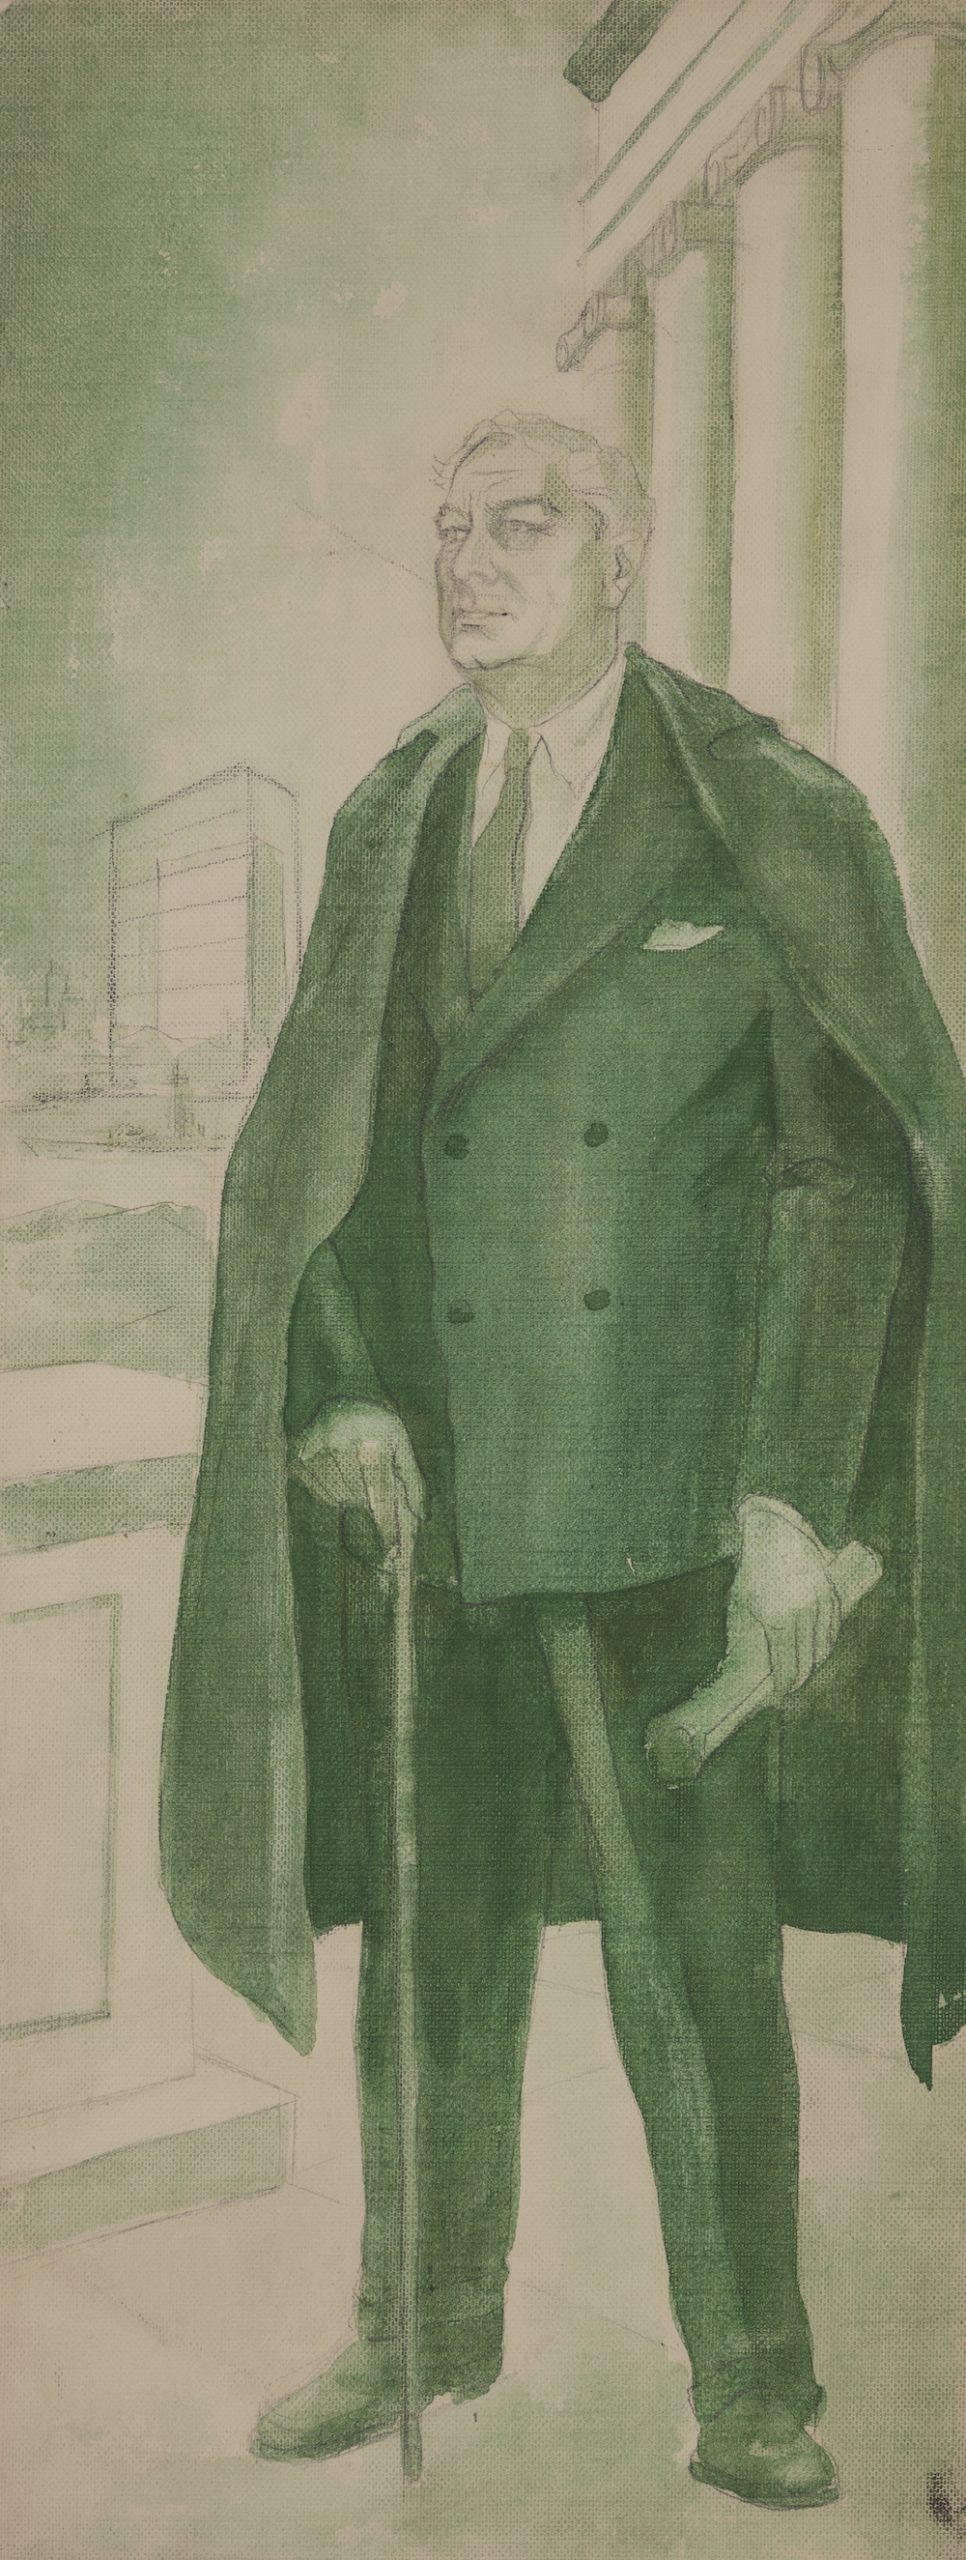 A study for a tall, narrow portrait of FDR standing in front of a large while building with pillars, a skyscraper, and a body of water.